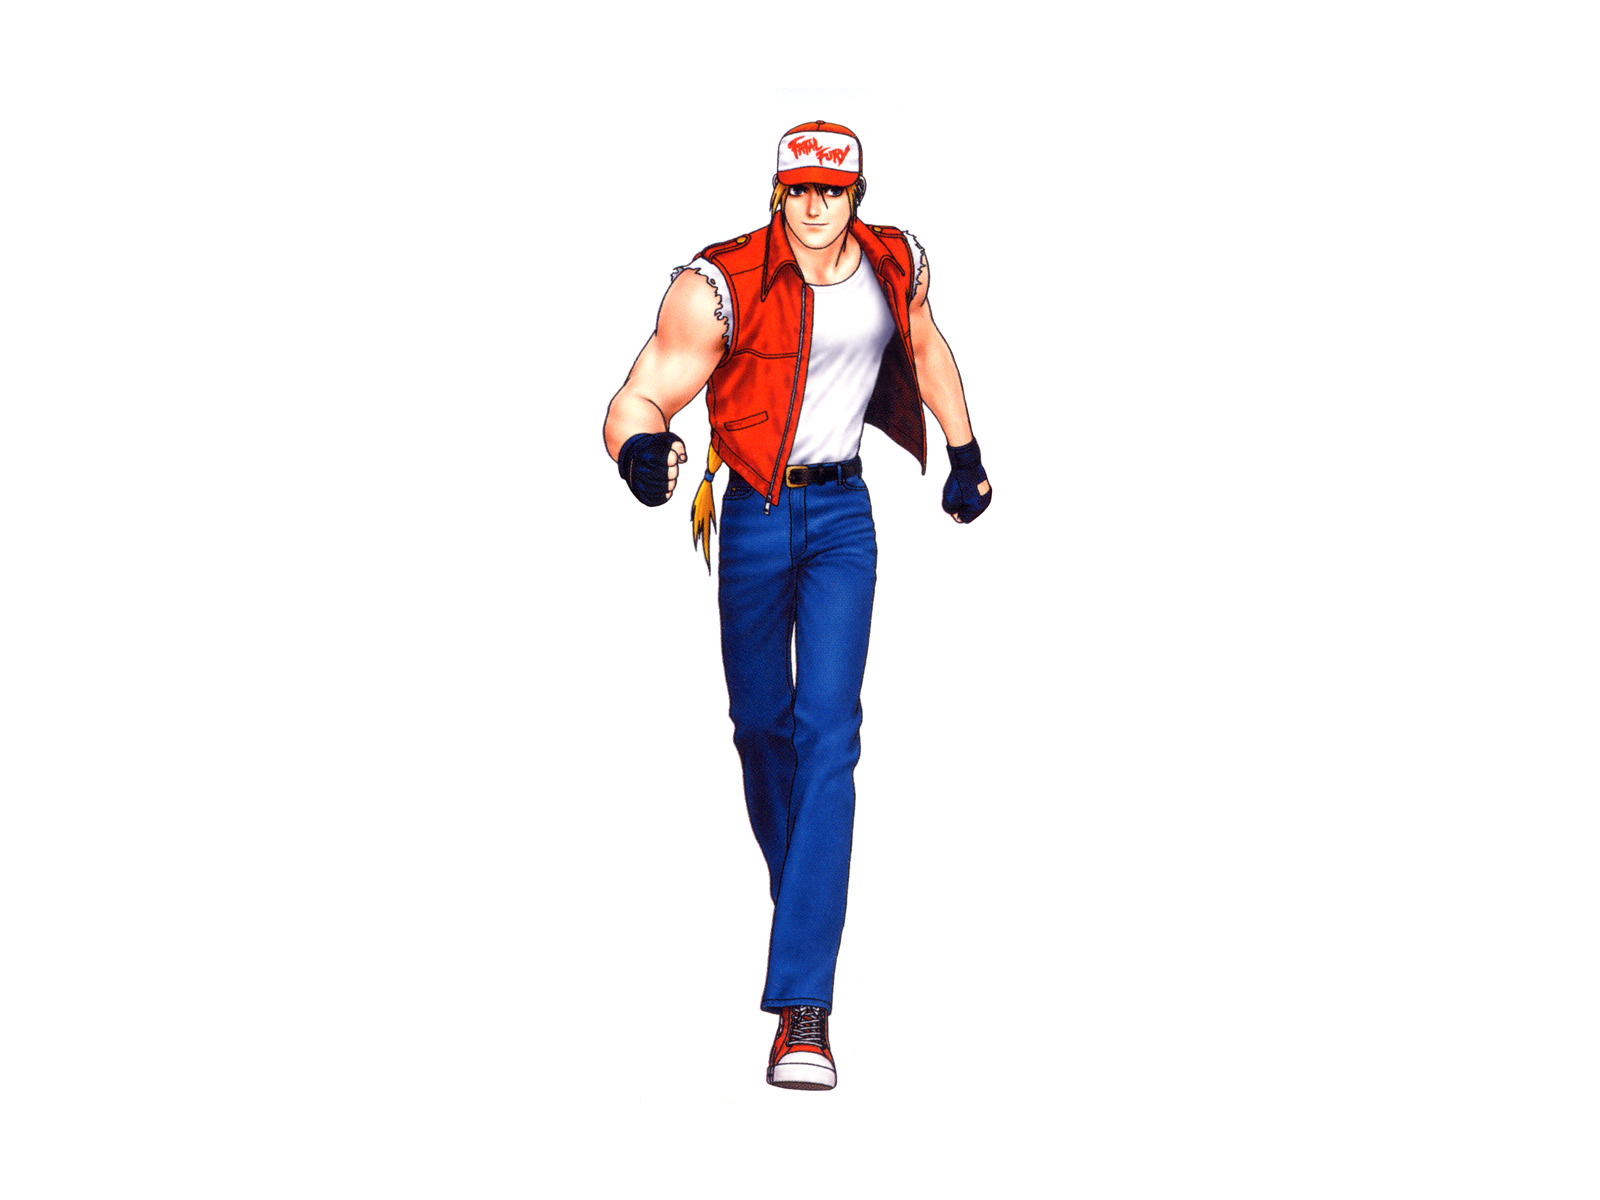 king of fighters, video game, terry bogard